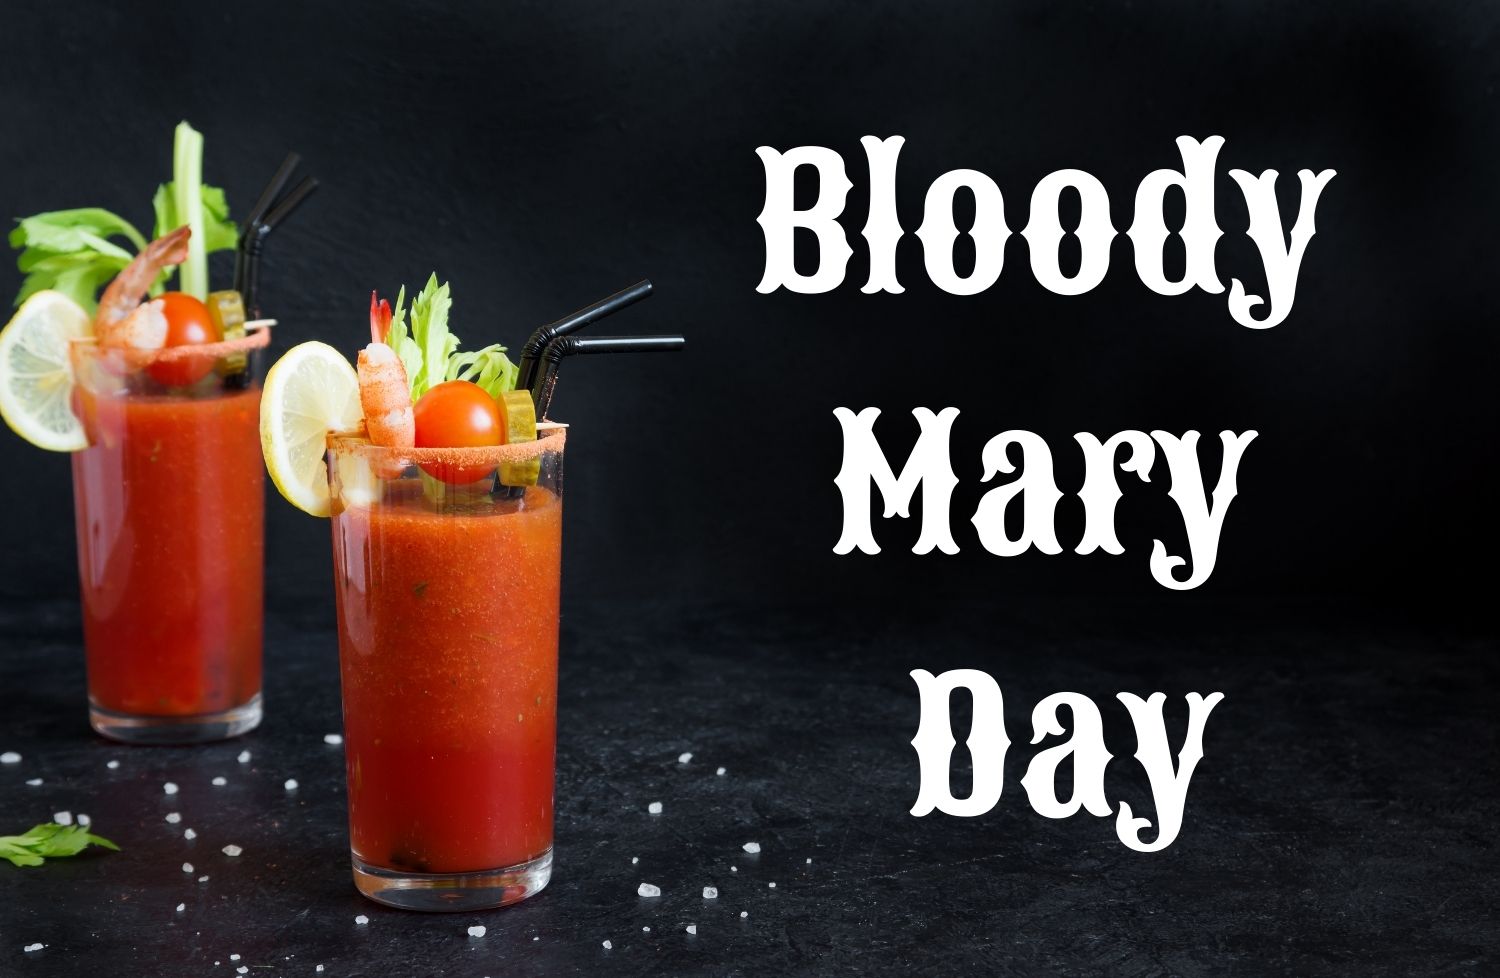 2024 ⇒ How many days until Bloody Mary Day?